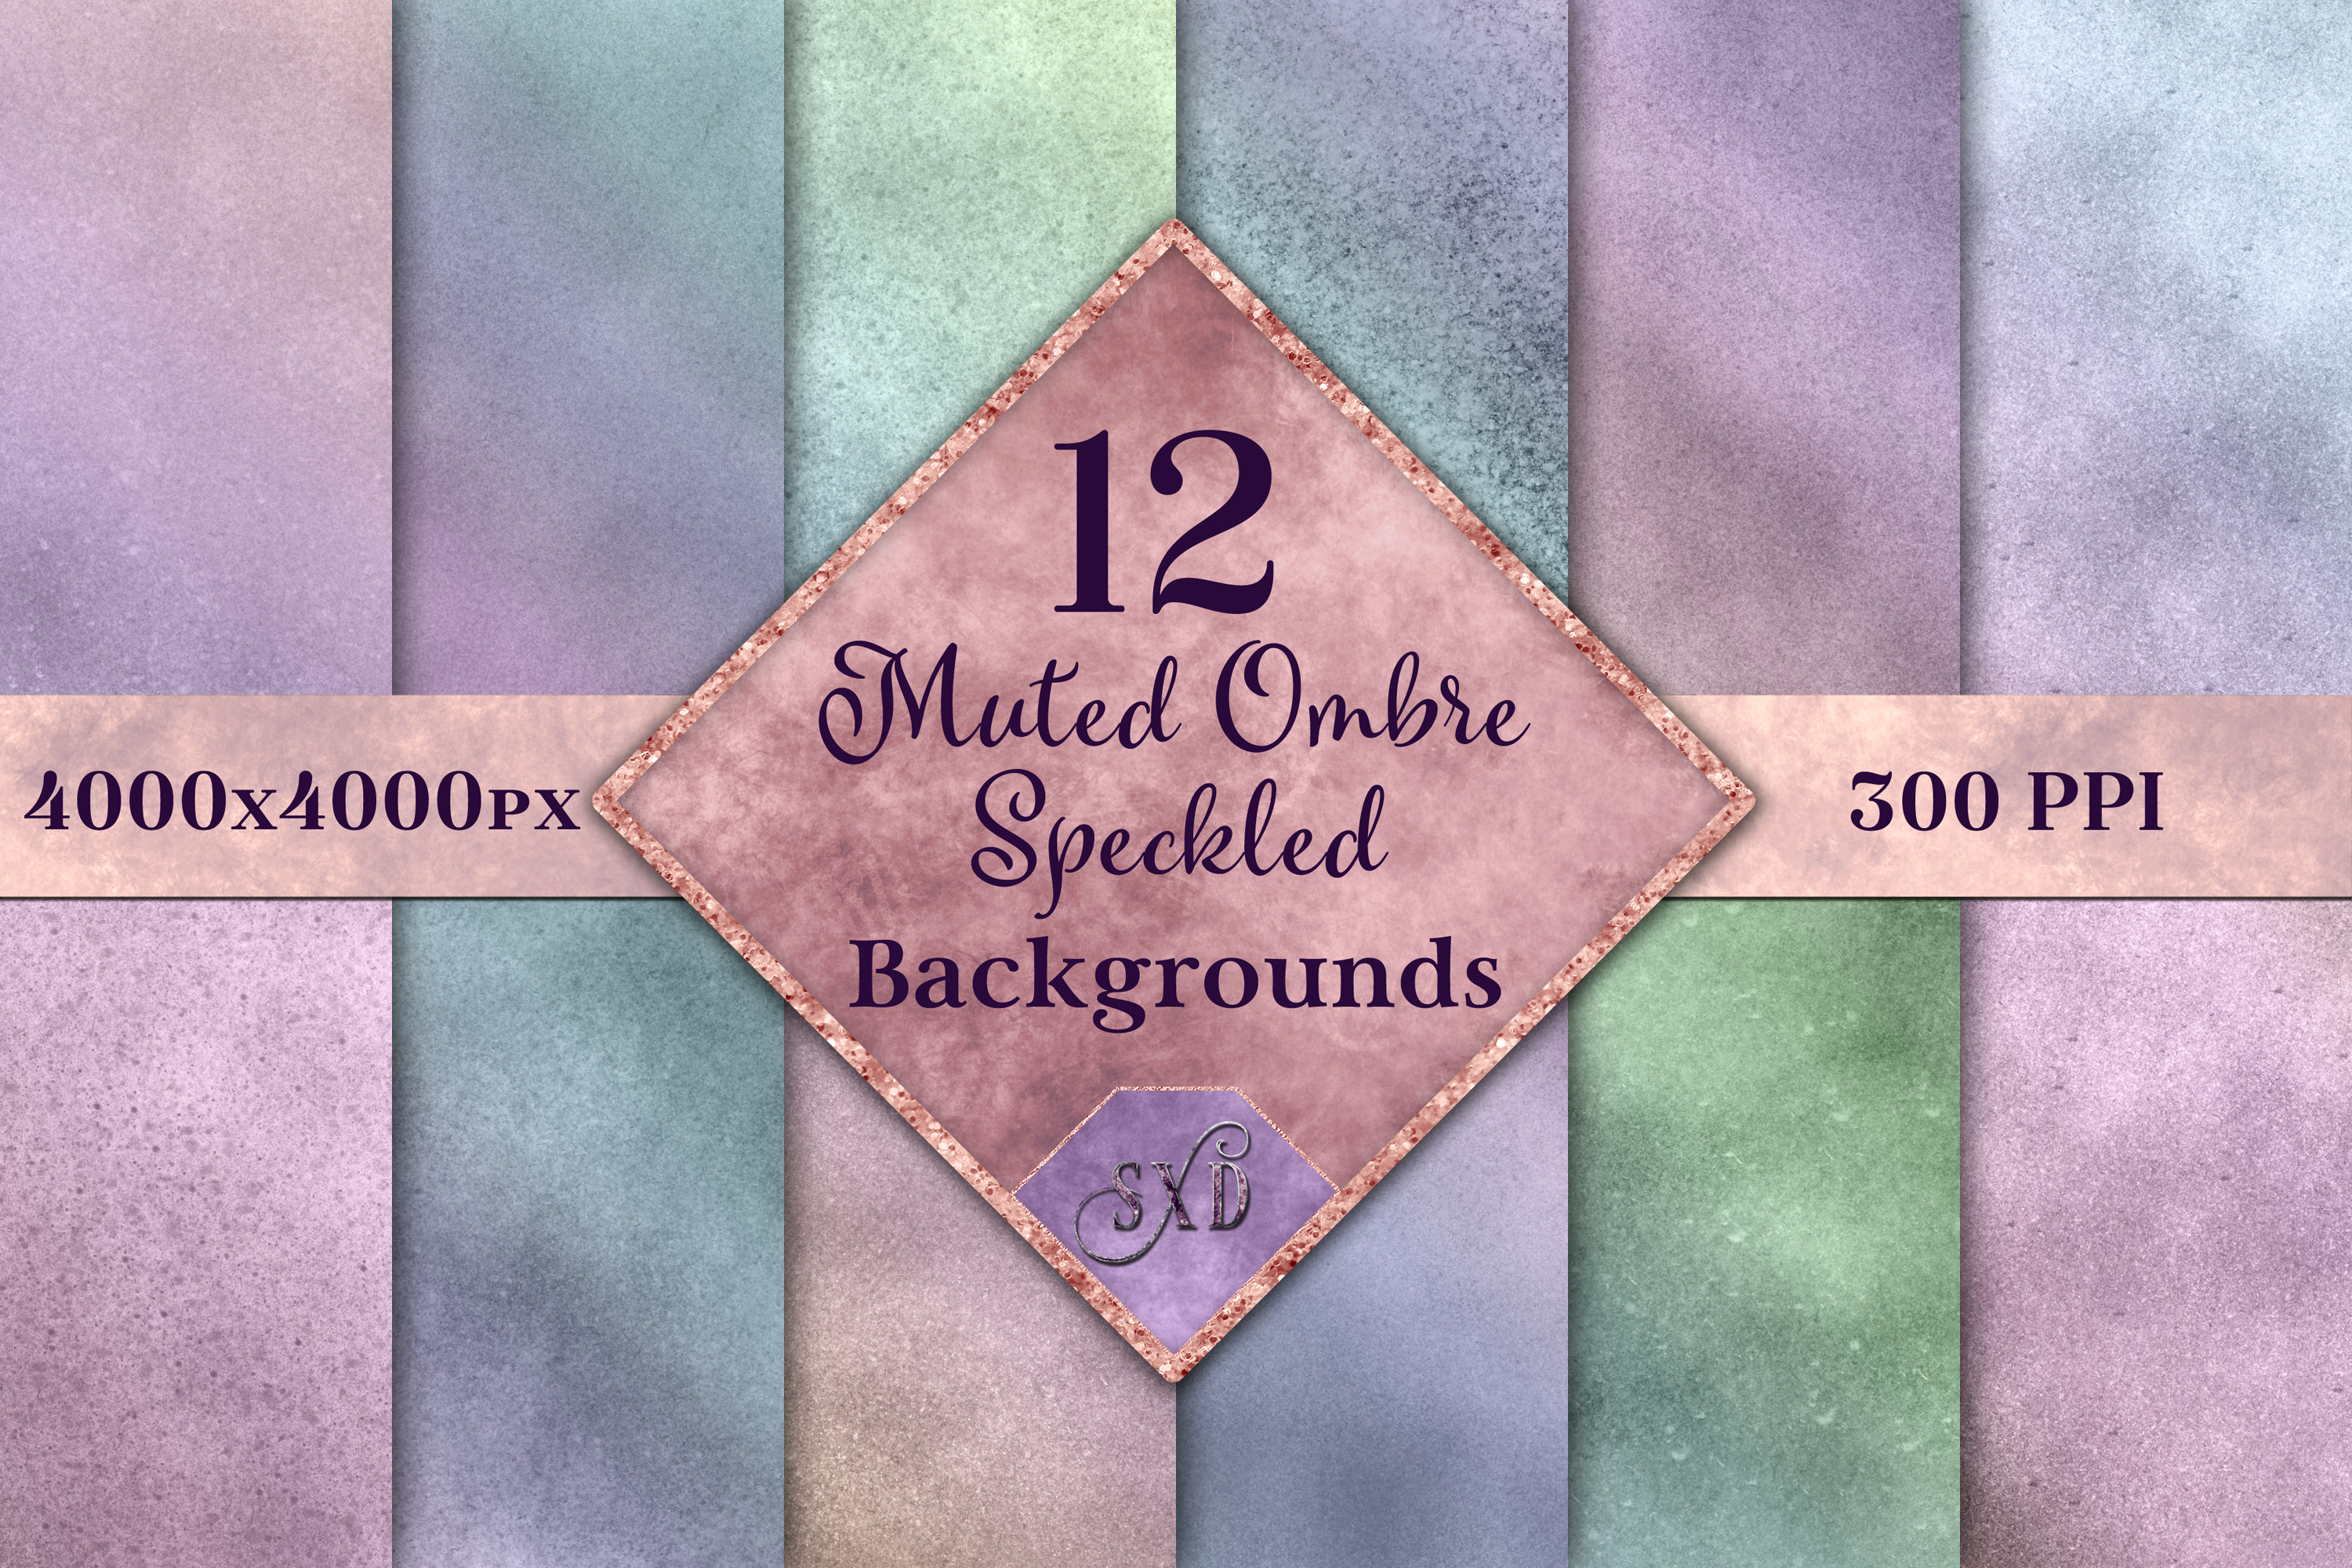 Muted Ombre Speckled Backgrounds Graphic by SapphireXDesigns